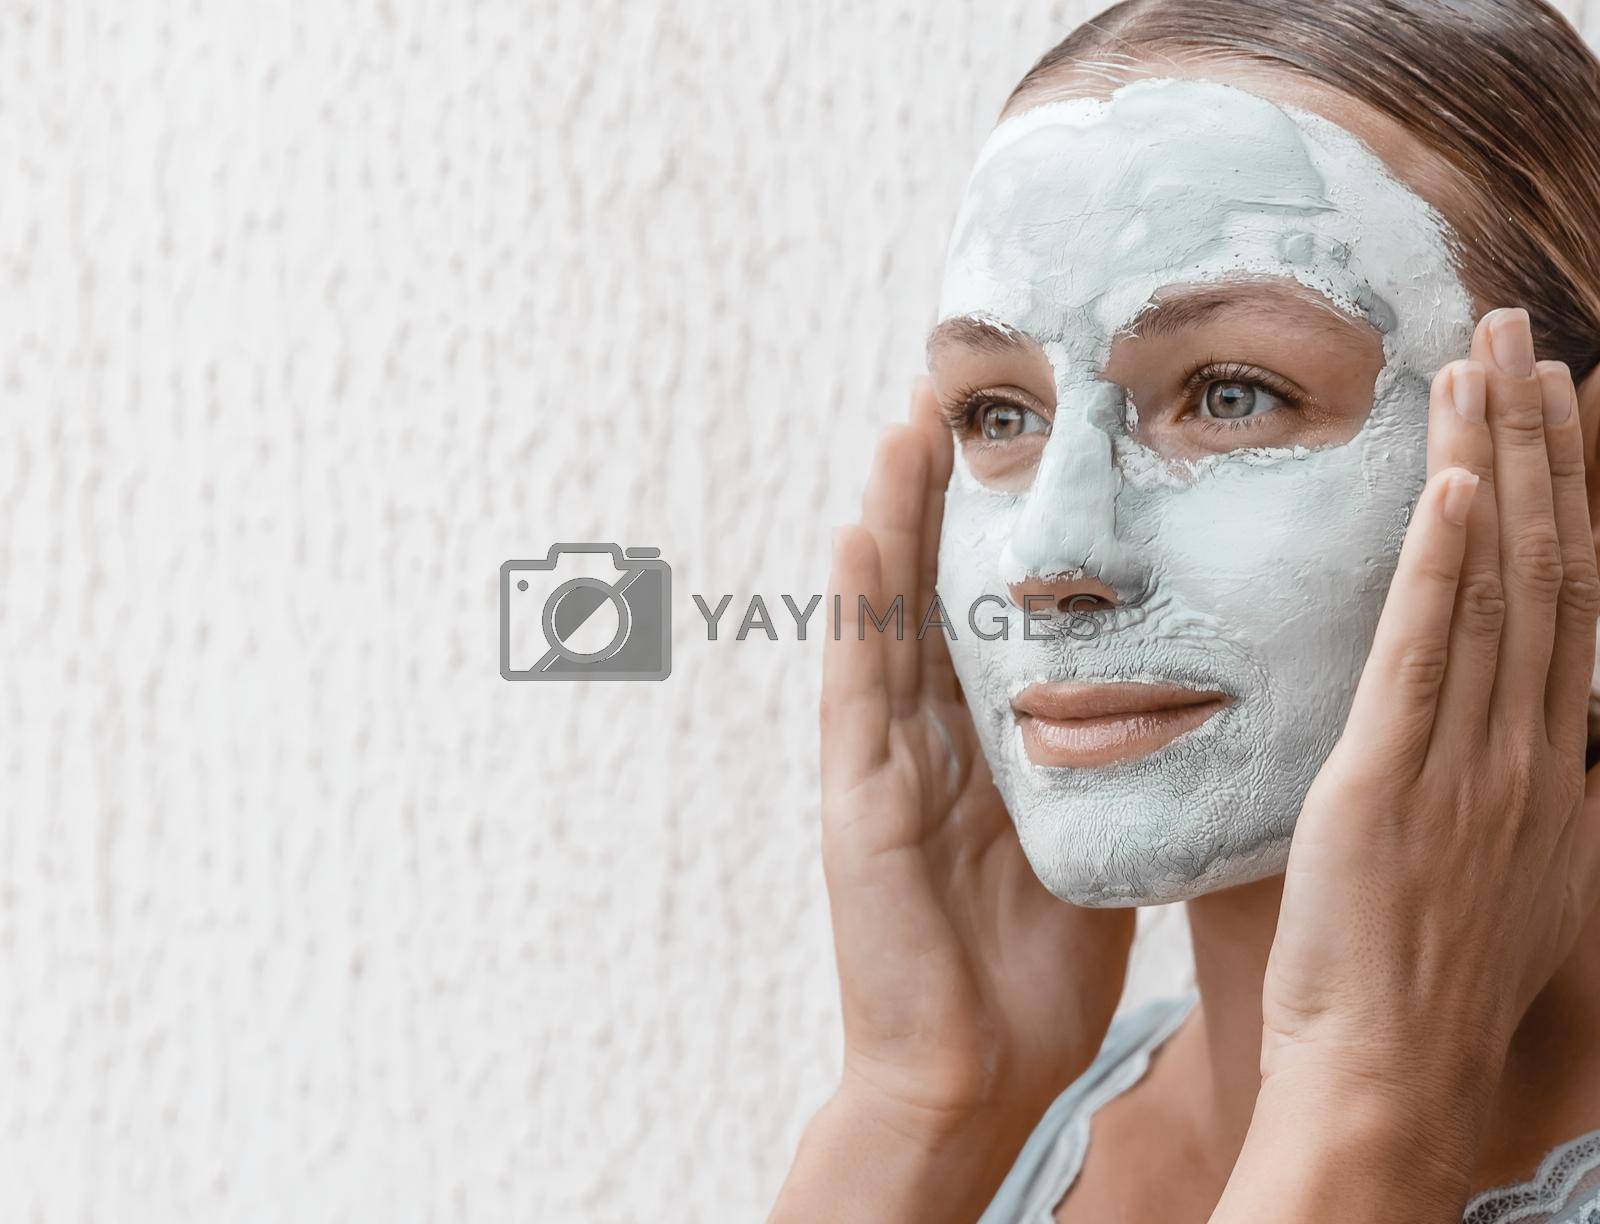 Royalty free image of Beauty Treatment Concept by Anna_Omelchenko